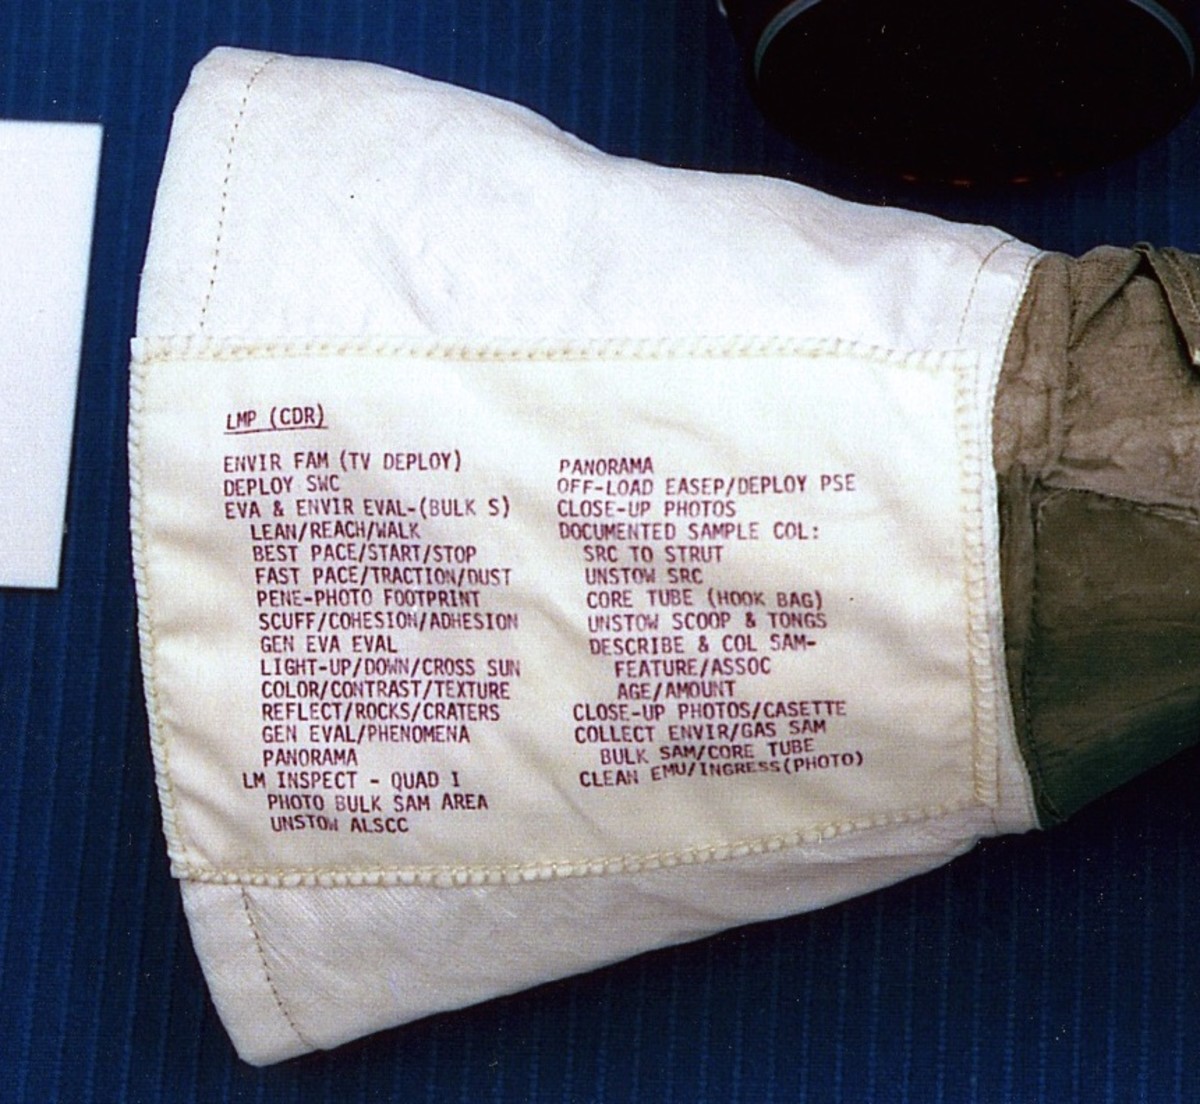 This pre-flight photo shows Buzz Aldrin's left glove, including the sewn-on checklist.